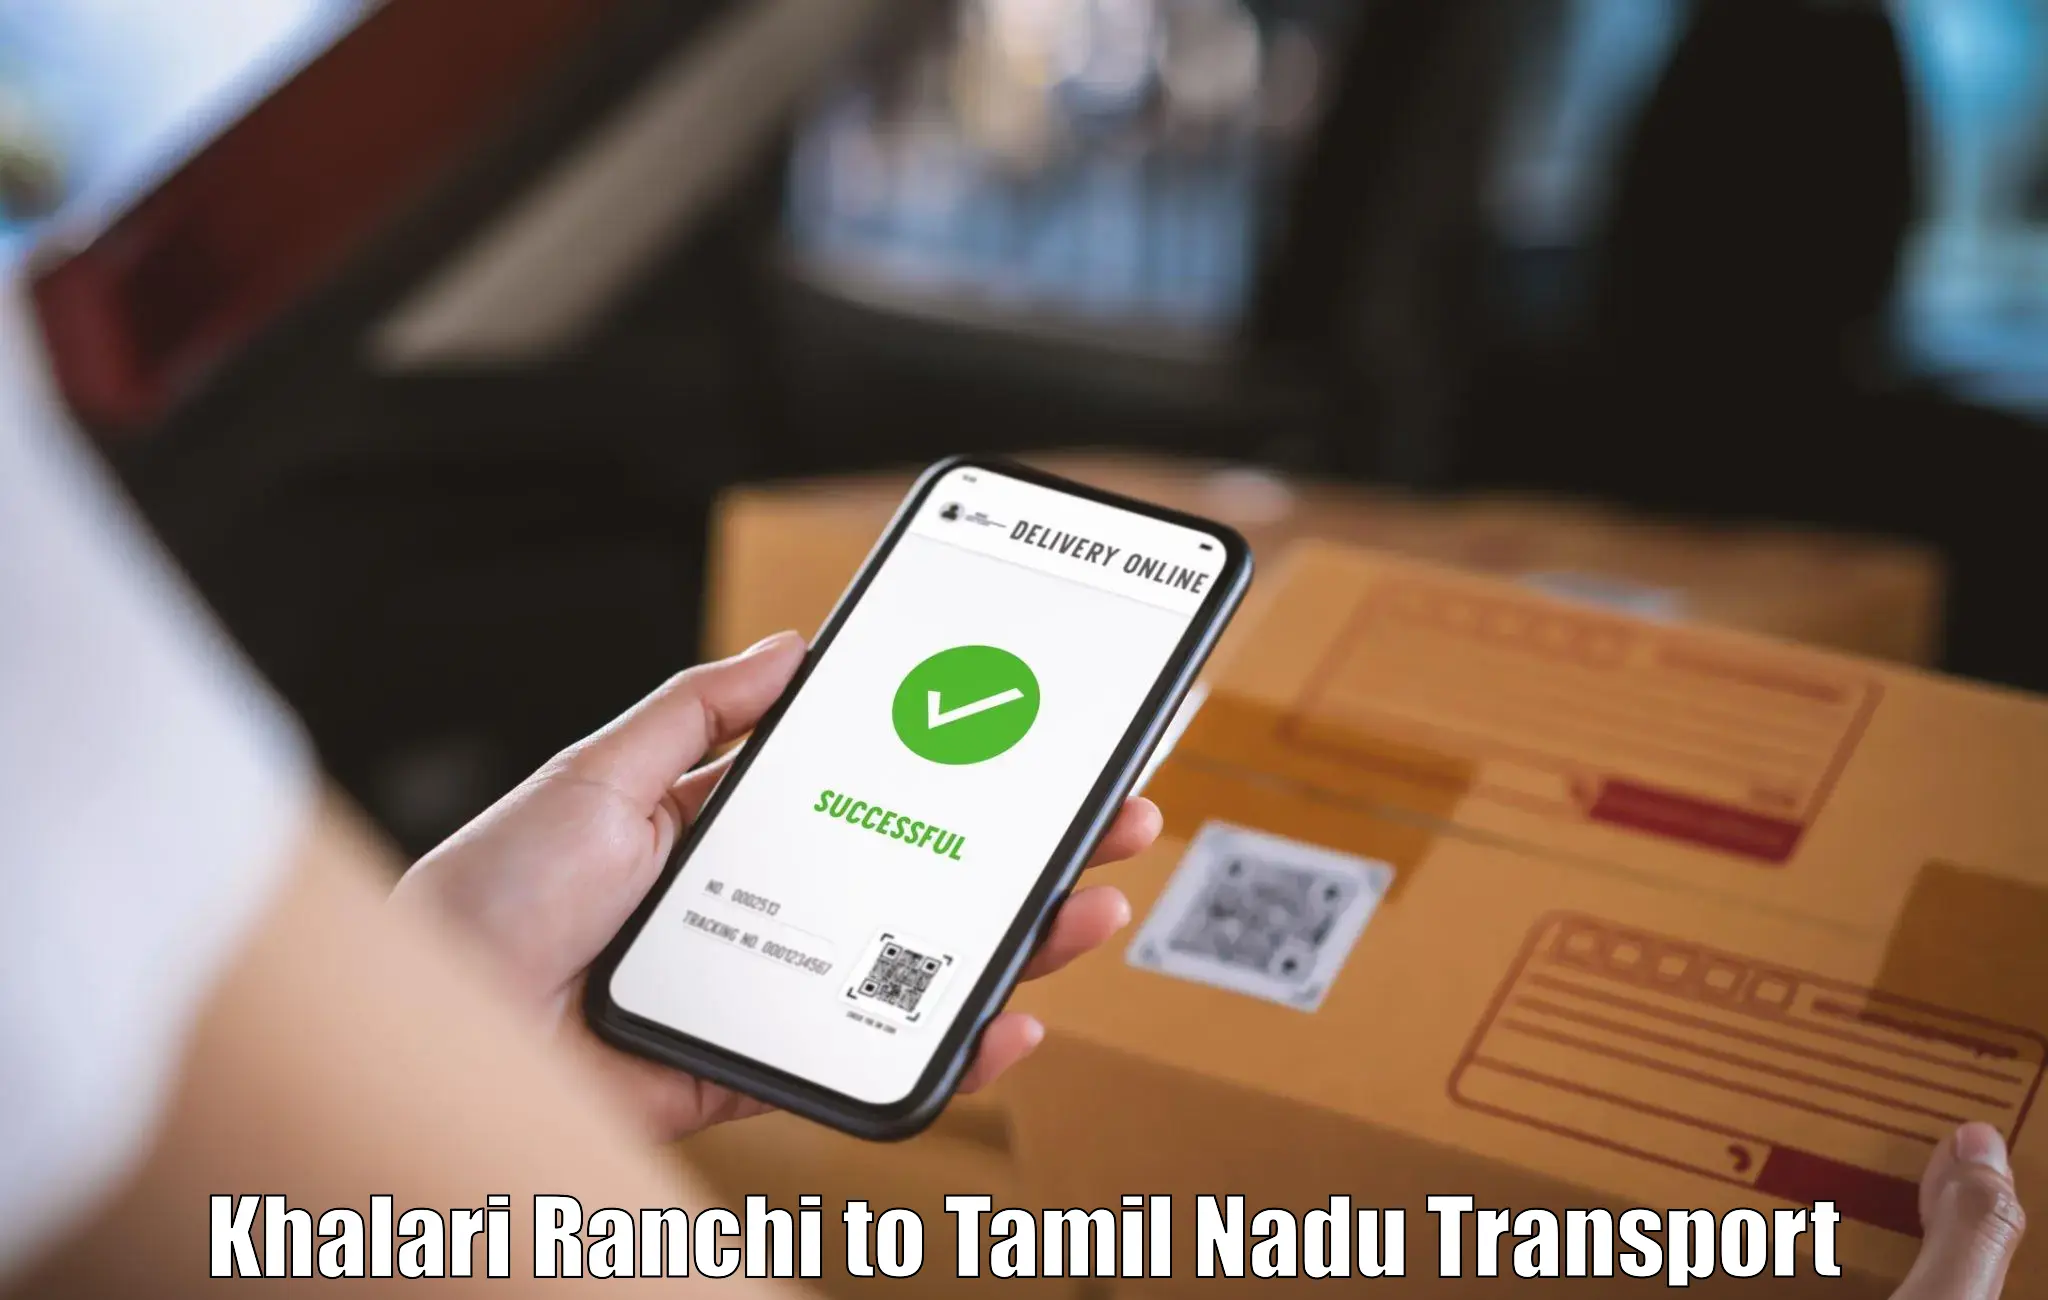 Package delivery services Khalari Ranchi to Thisayanvilai